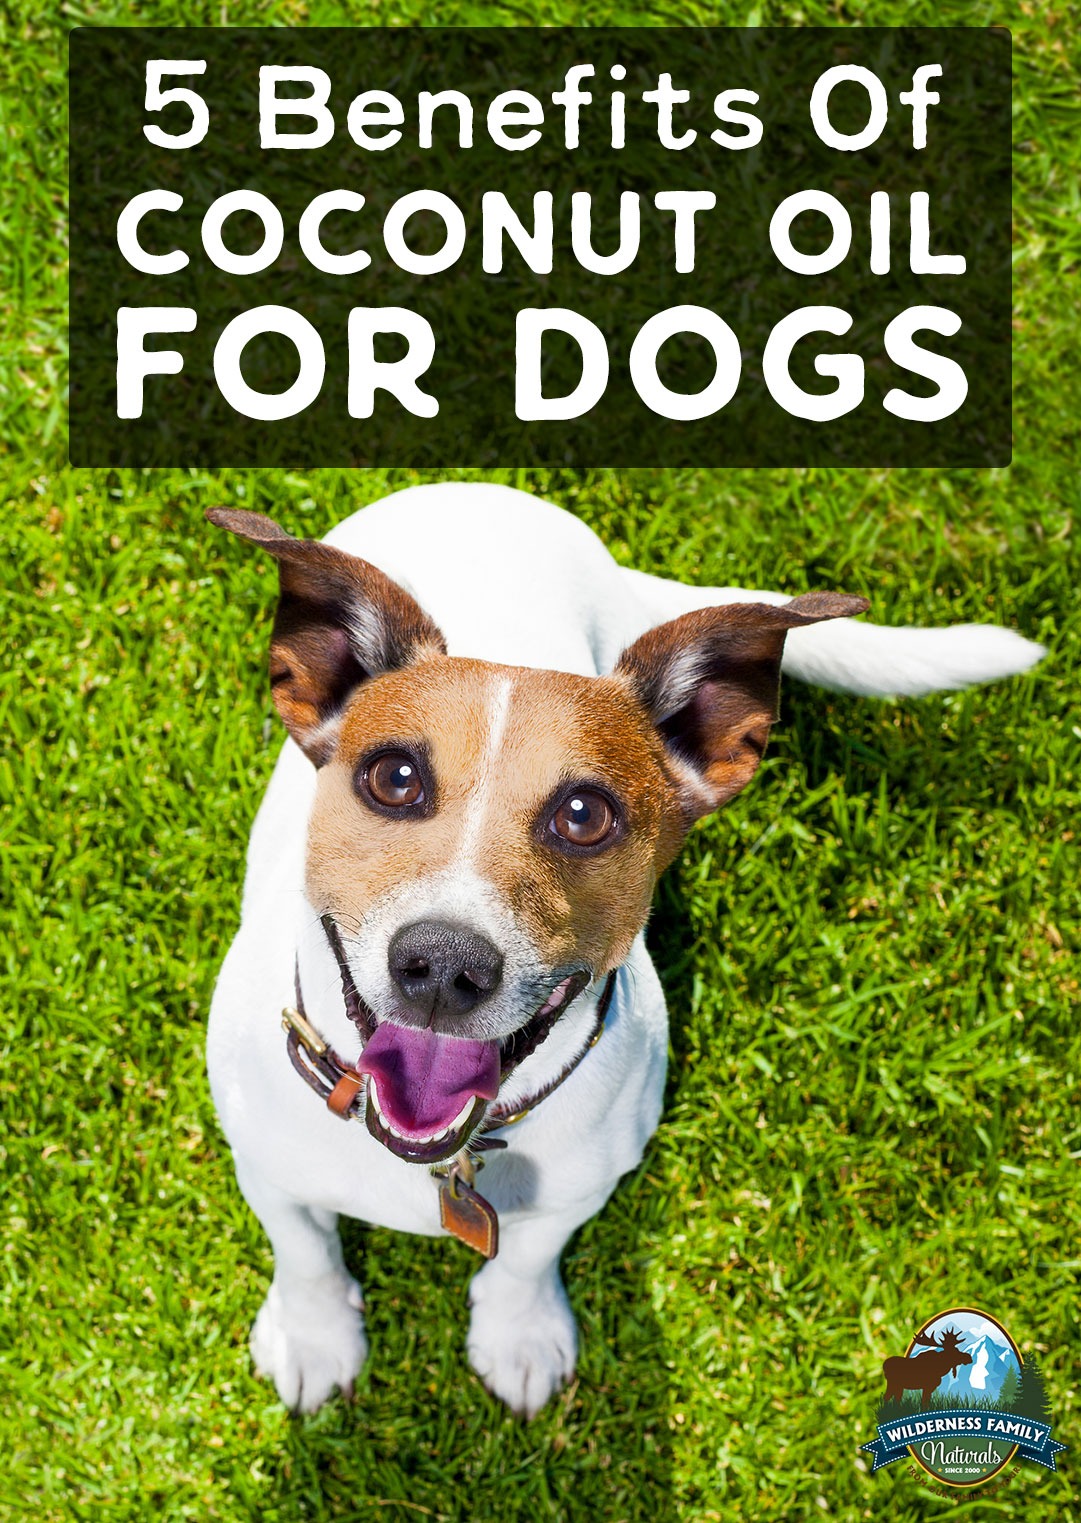 5 Benefits Of Coconut Oil For Dogs